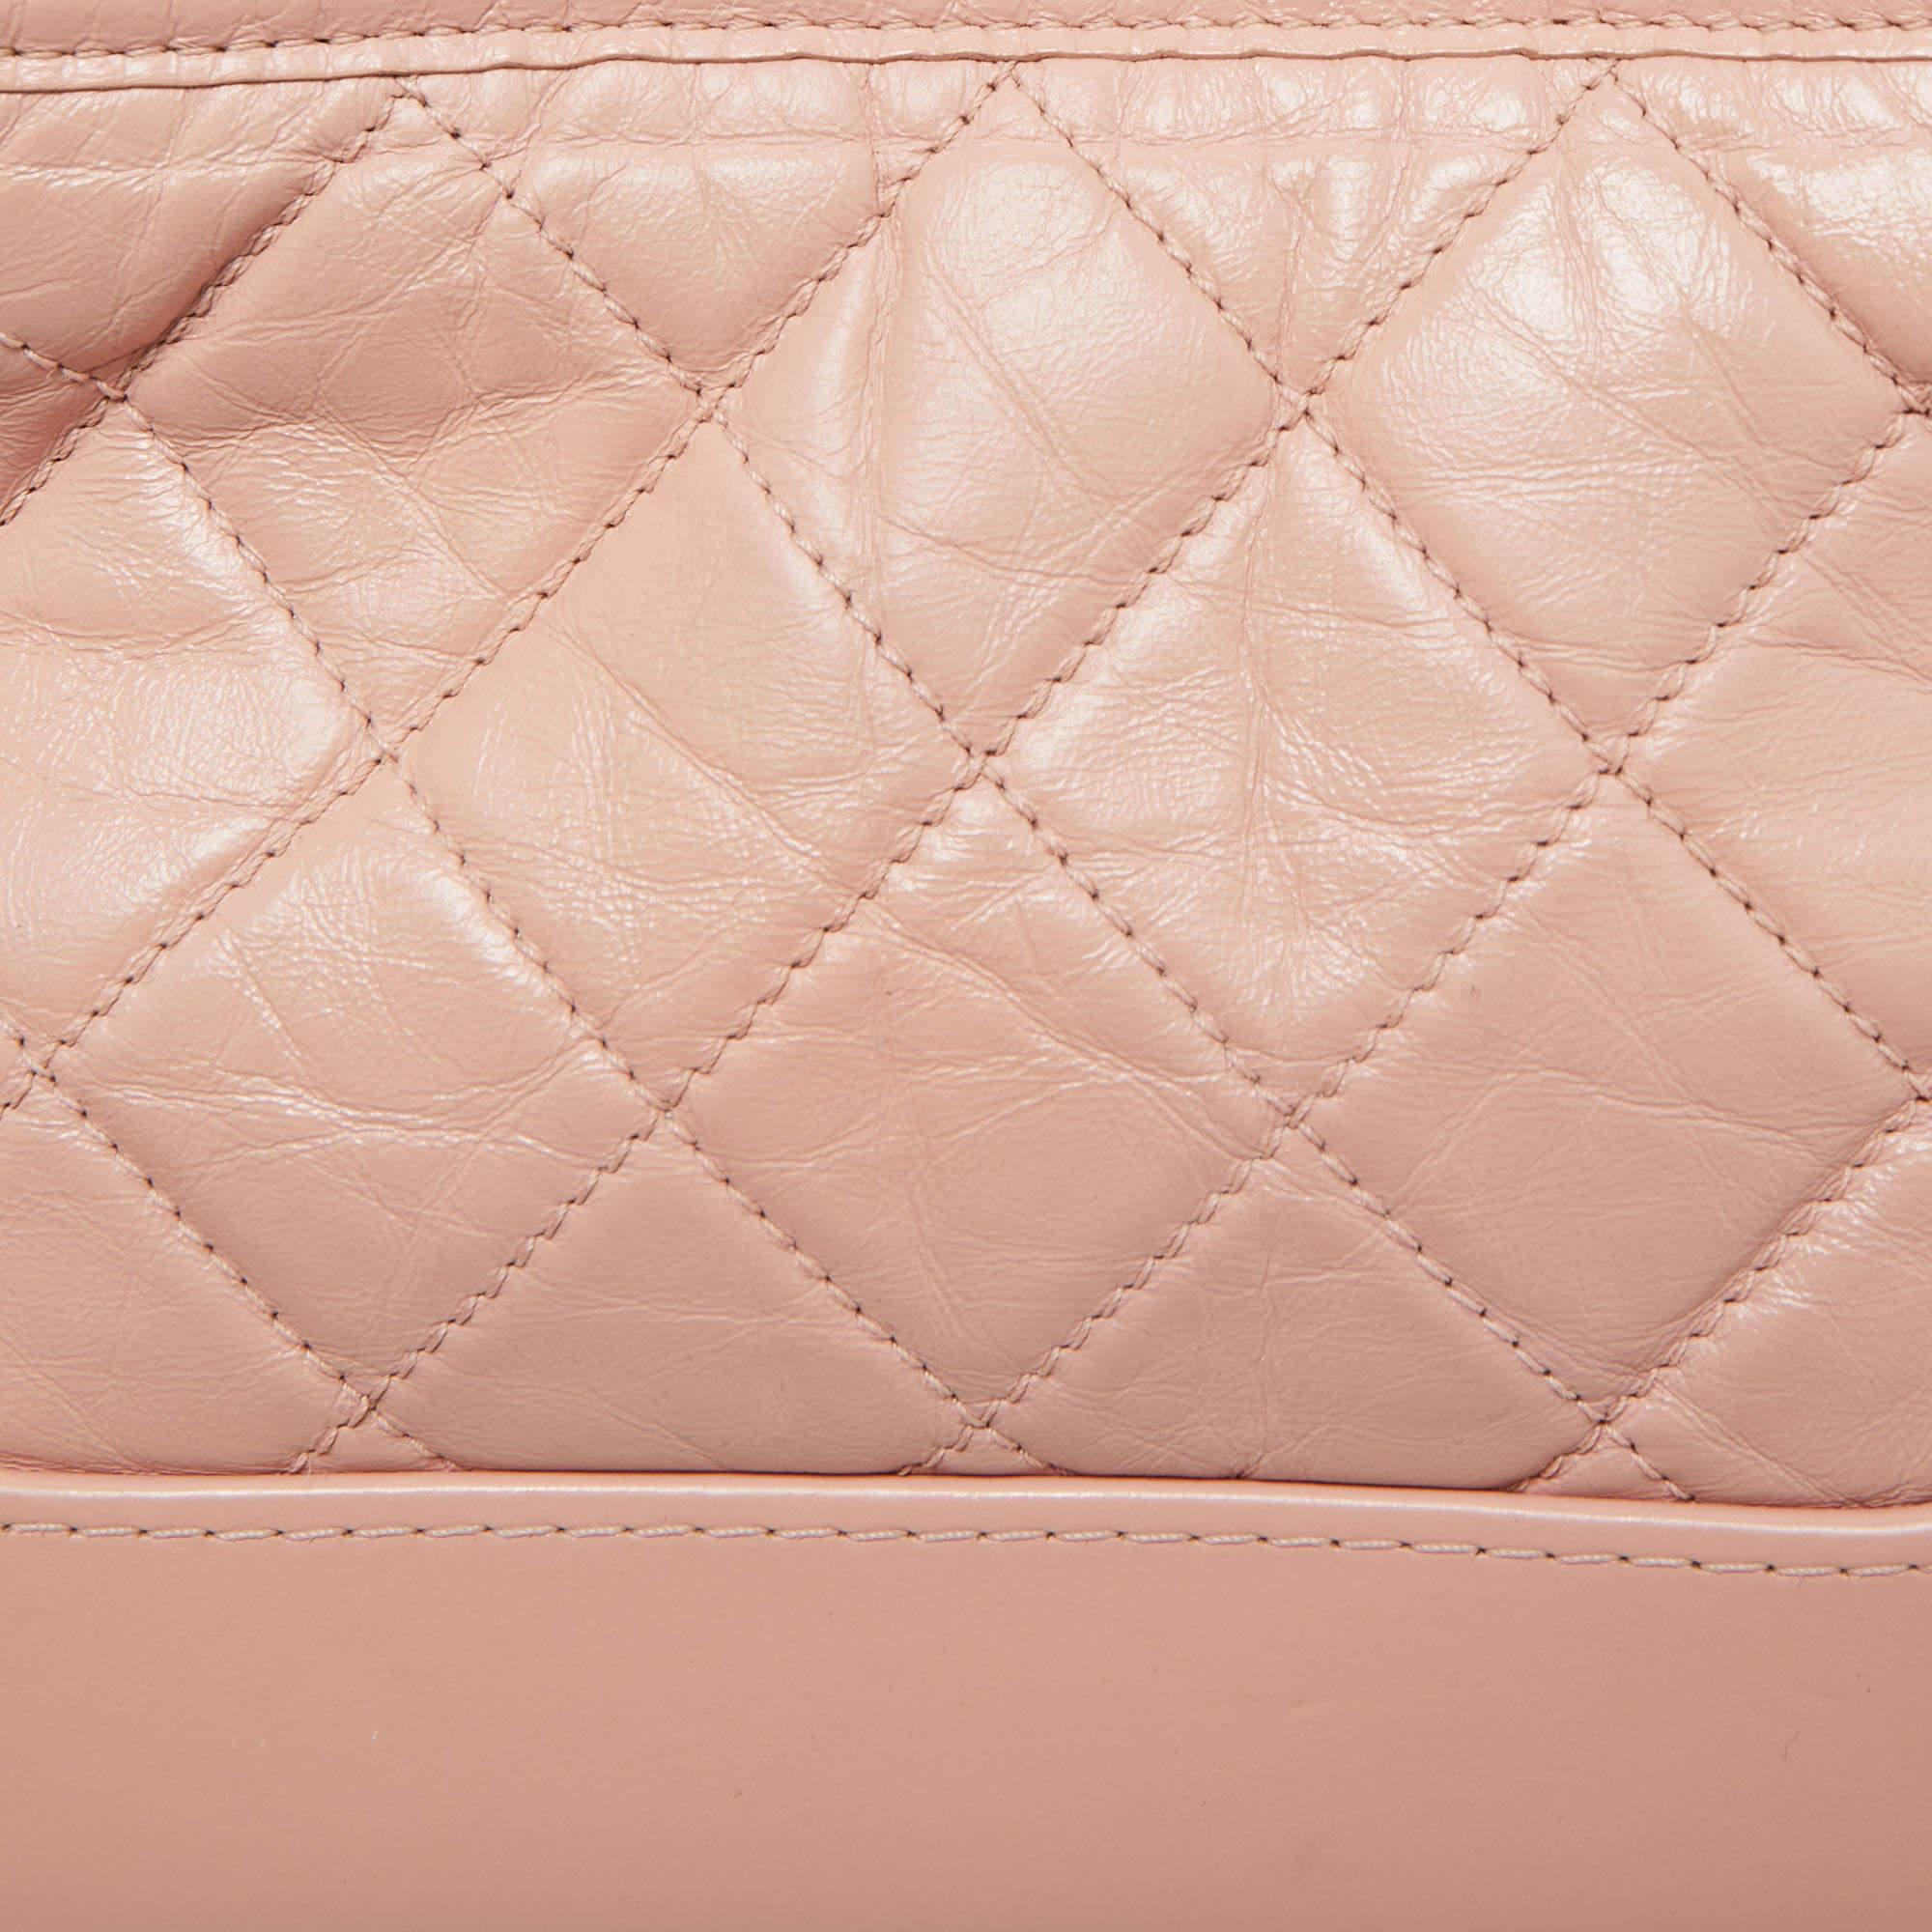 Chanel Pink Quilted Leather Small Gabrielle Hobo In Good Condition In Dubai, Al Qouz 2